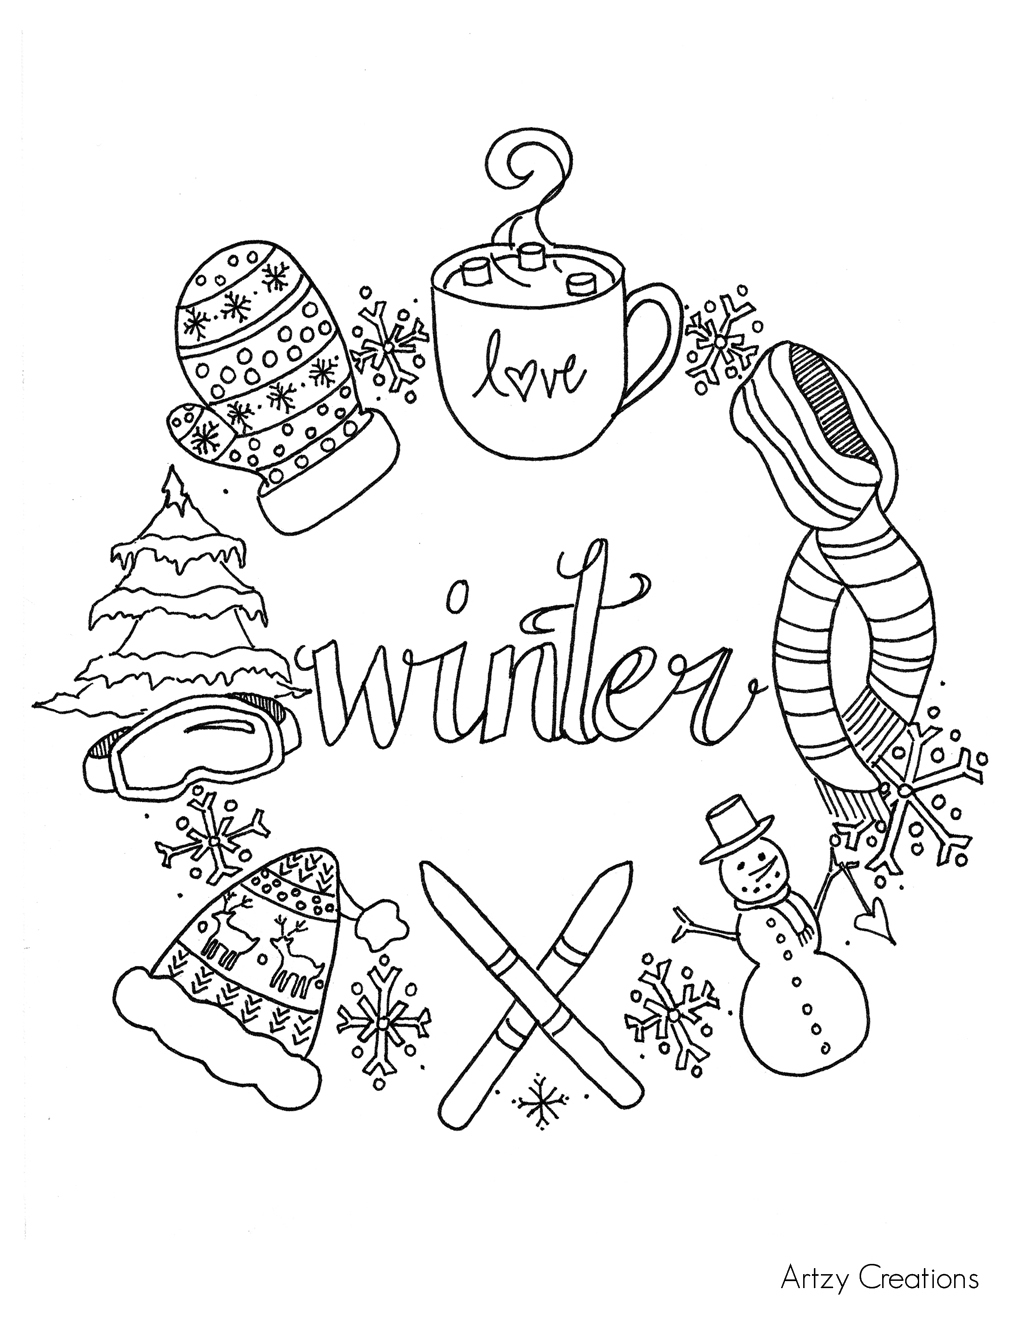 Let It Snow Coloring Pages Free Winter Coloring Page Artzycreations